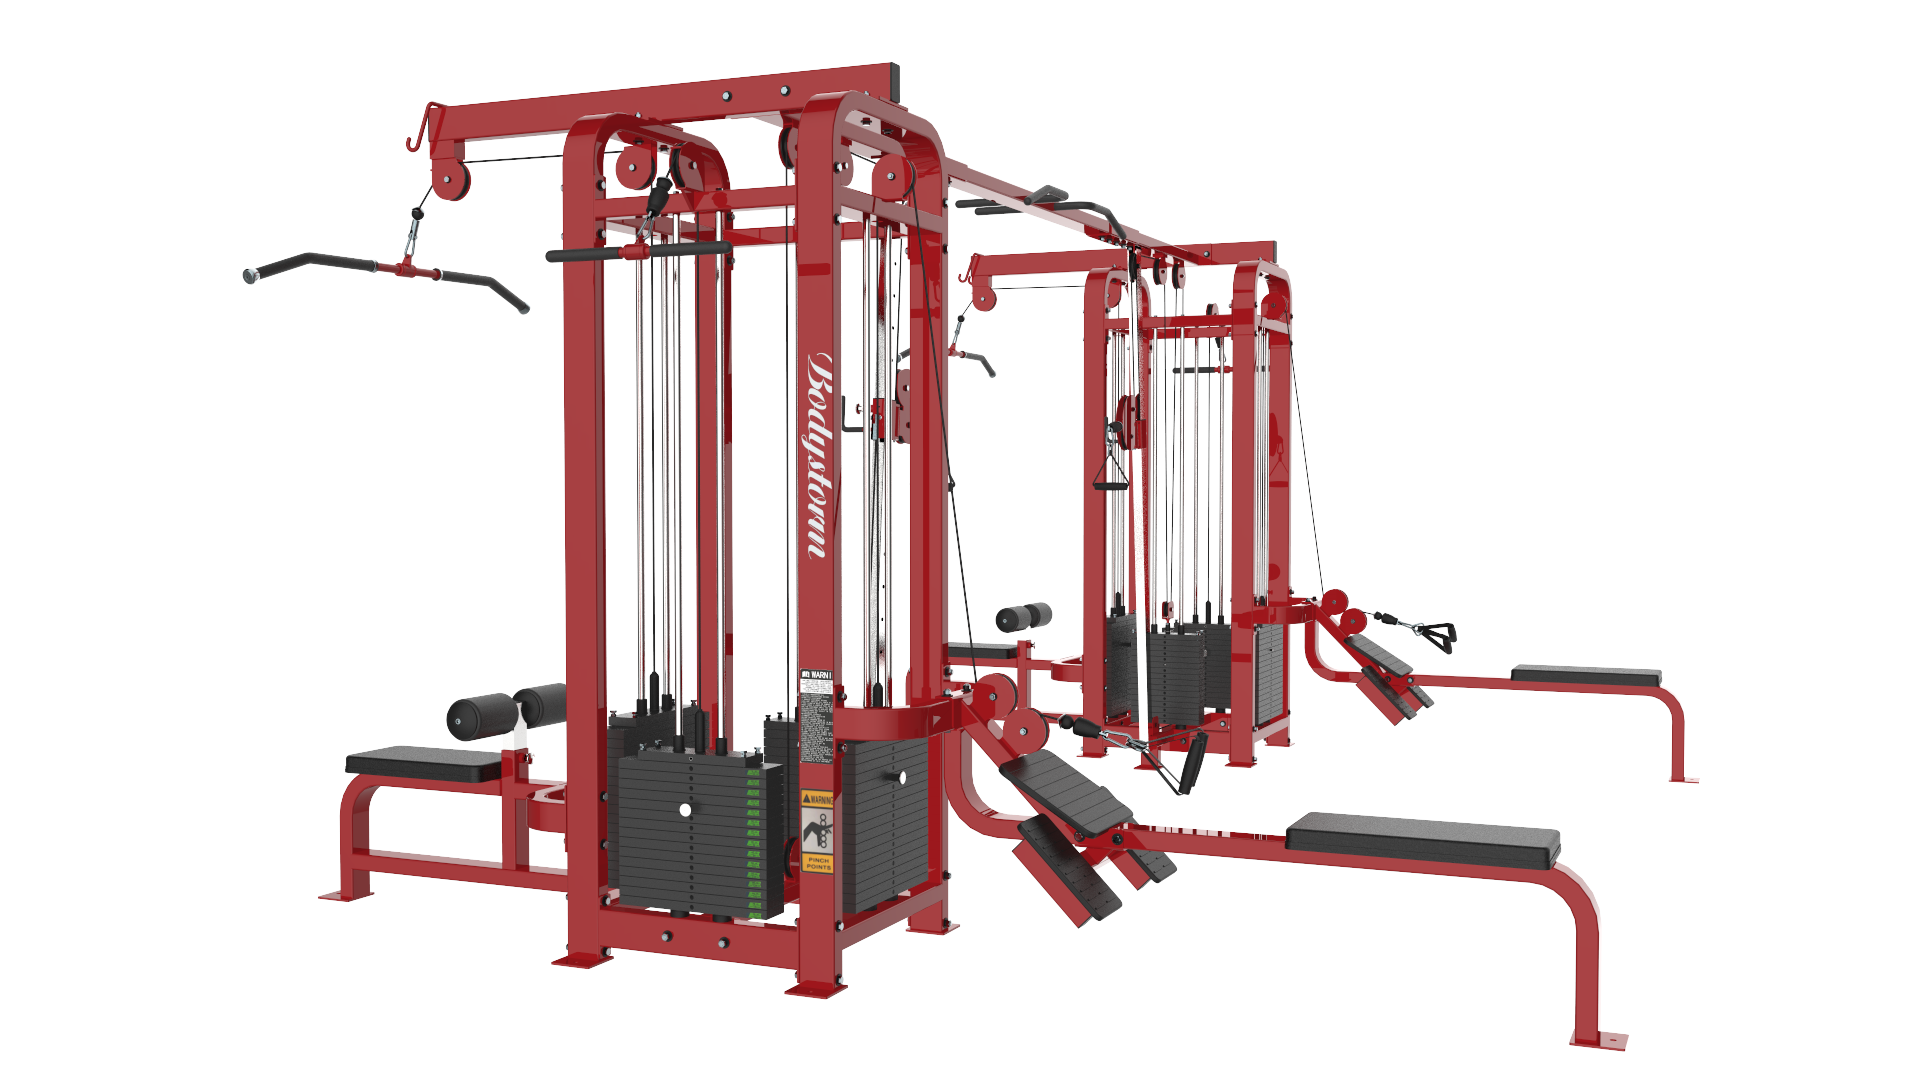 Multi - Jungel  multi Function Station workout gym fitness equipment